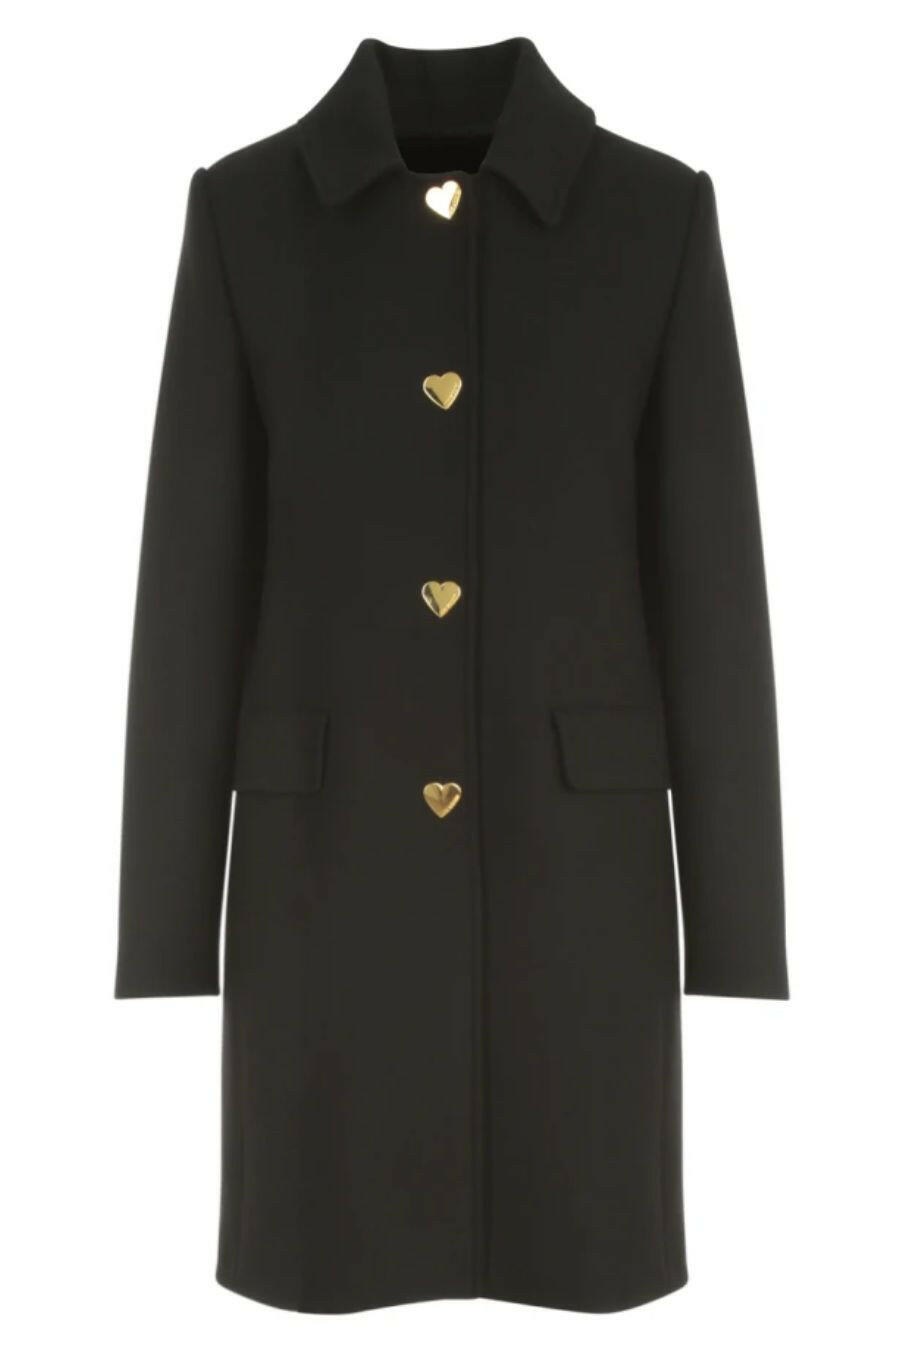 Love Moschino Elegant Black Wool Coat with Heart Buttons